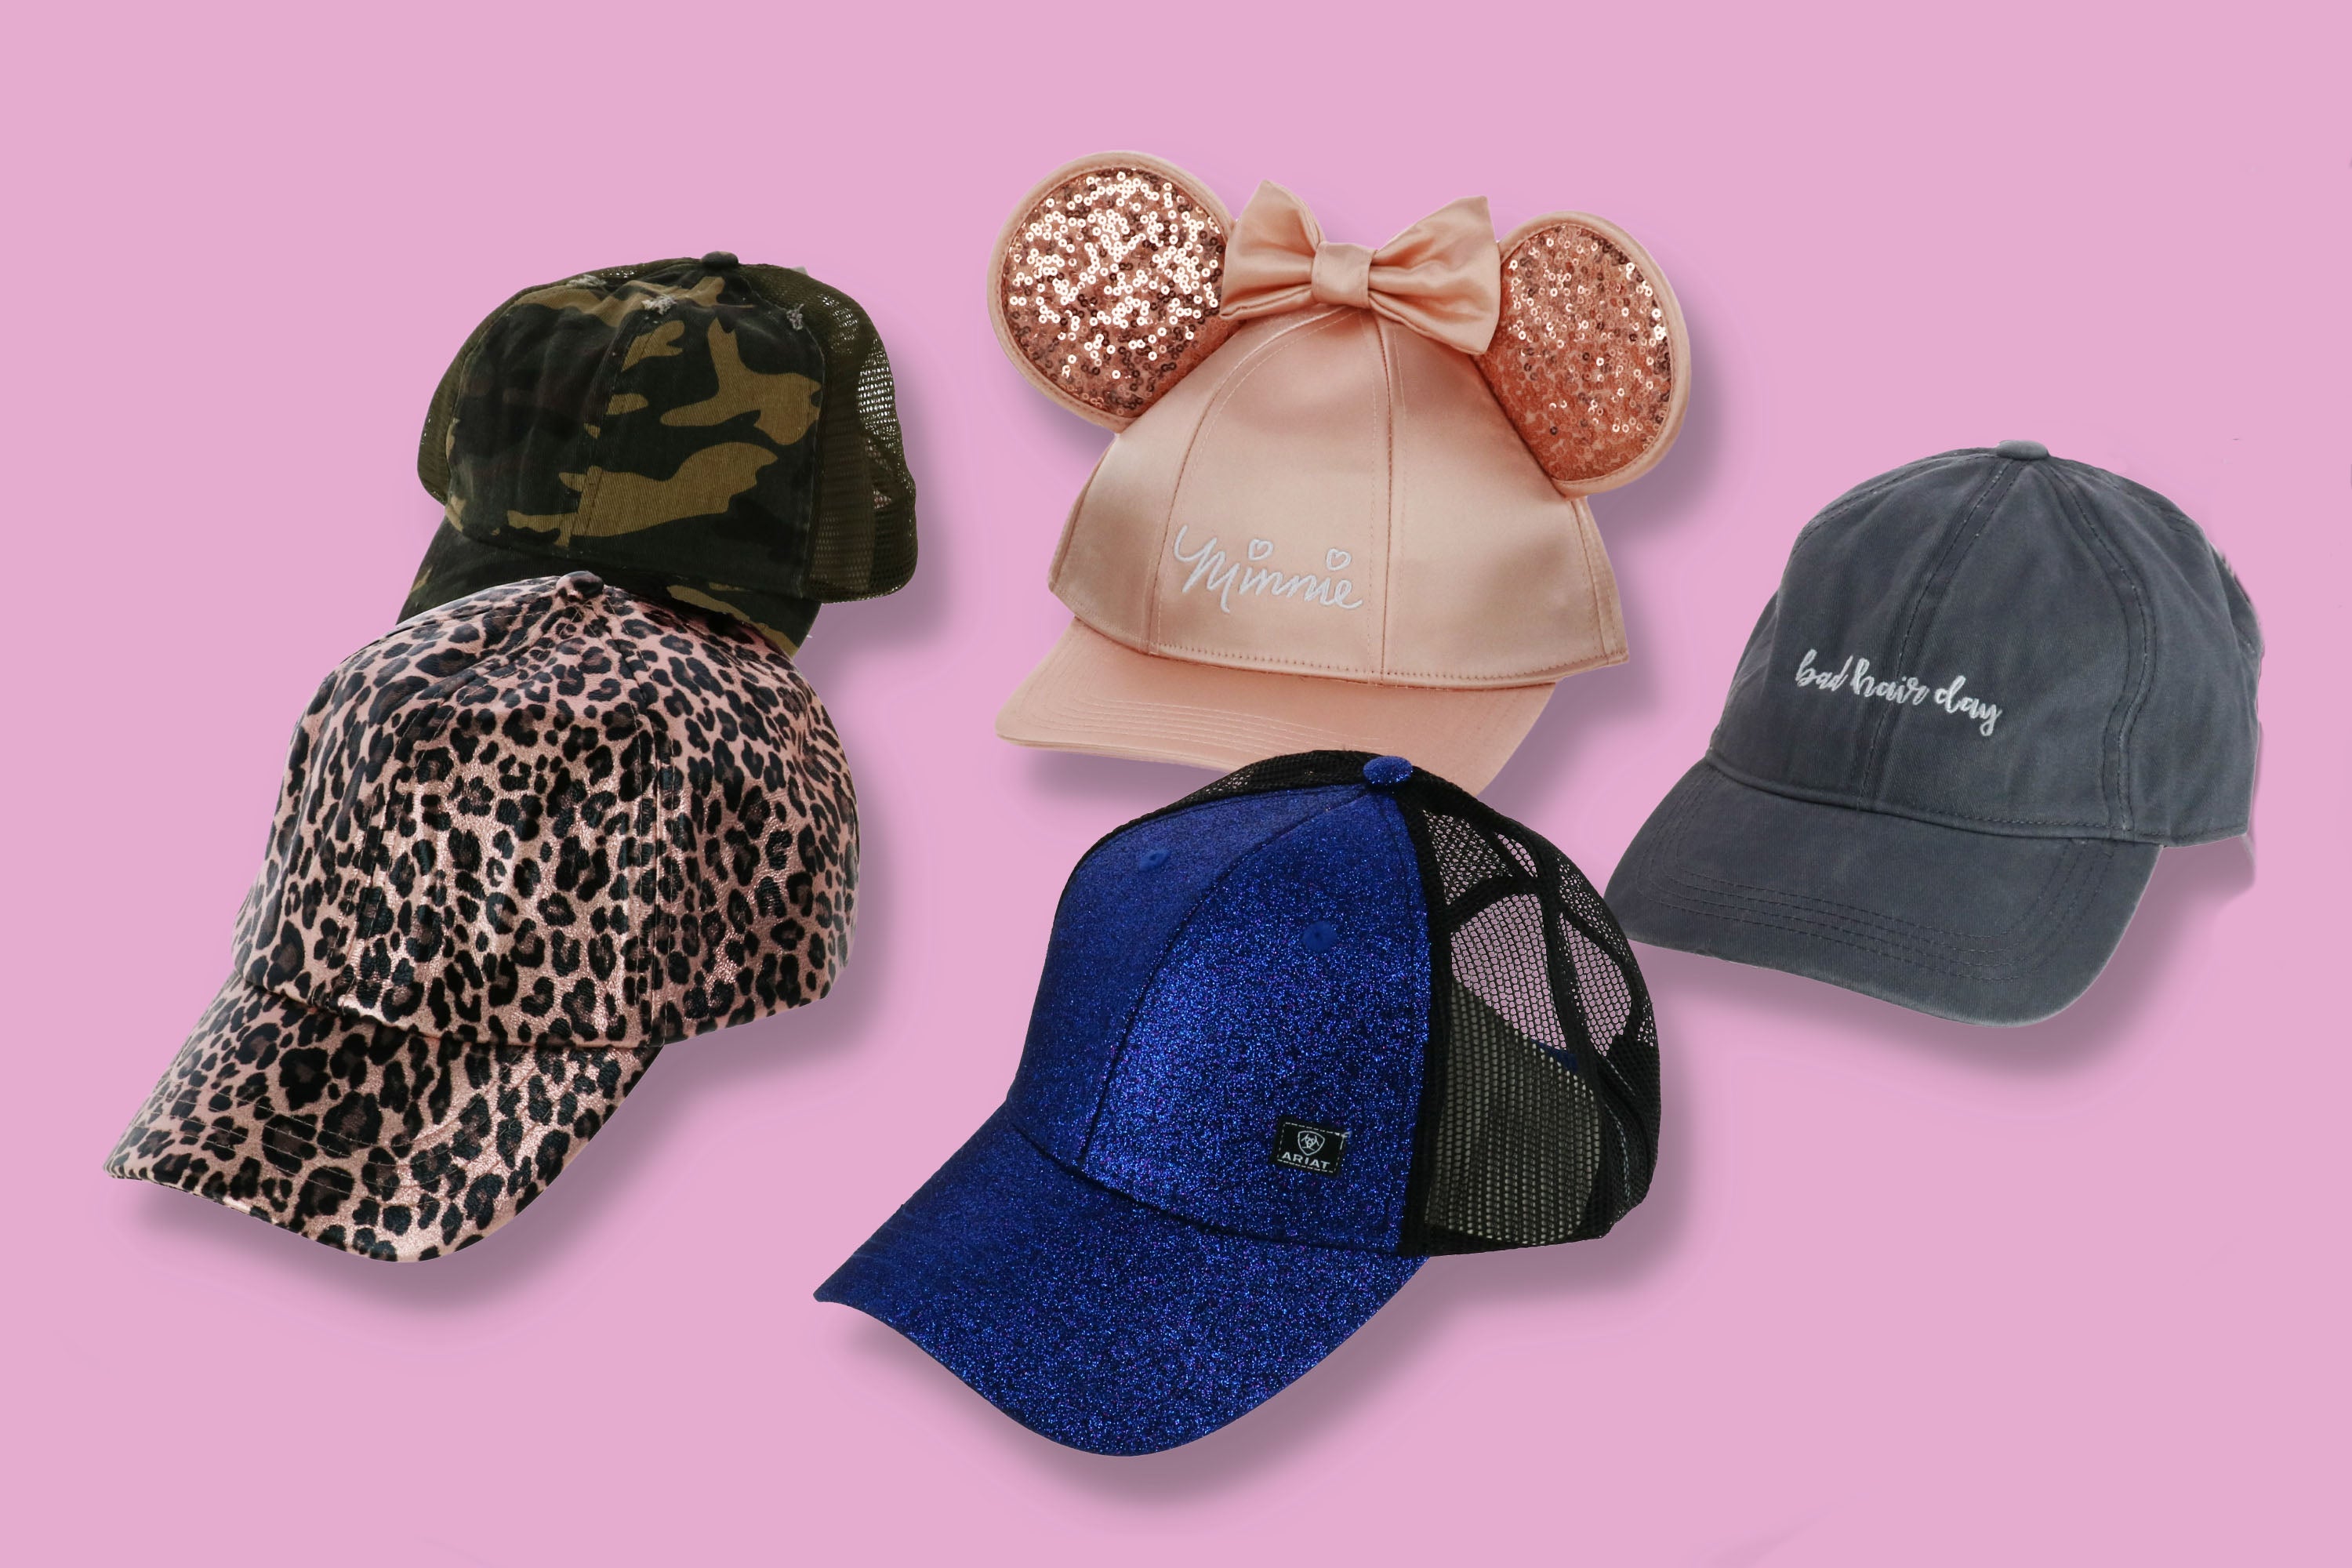 Cute and fun Baseball caps for women at BeltOutlet.com